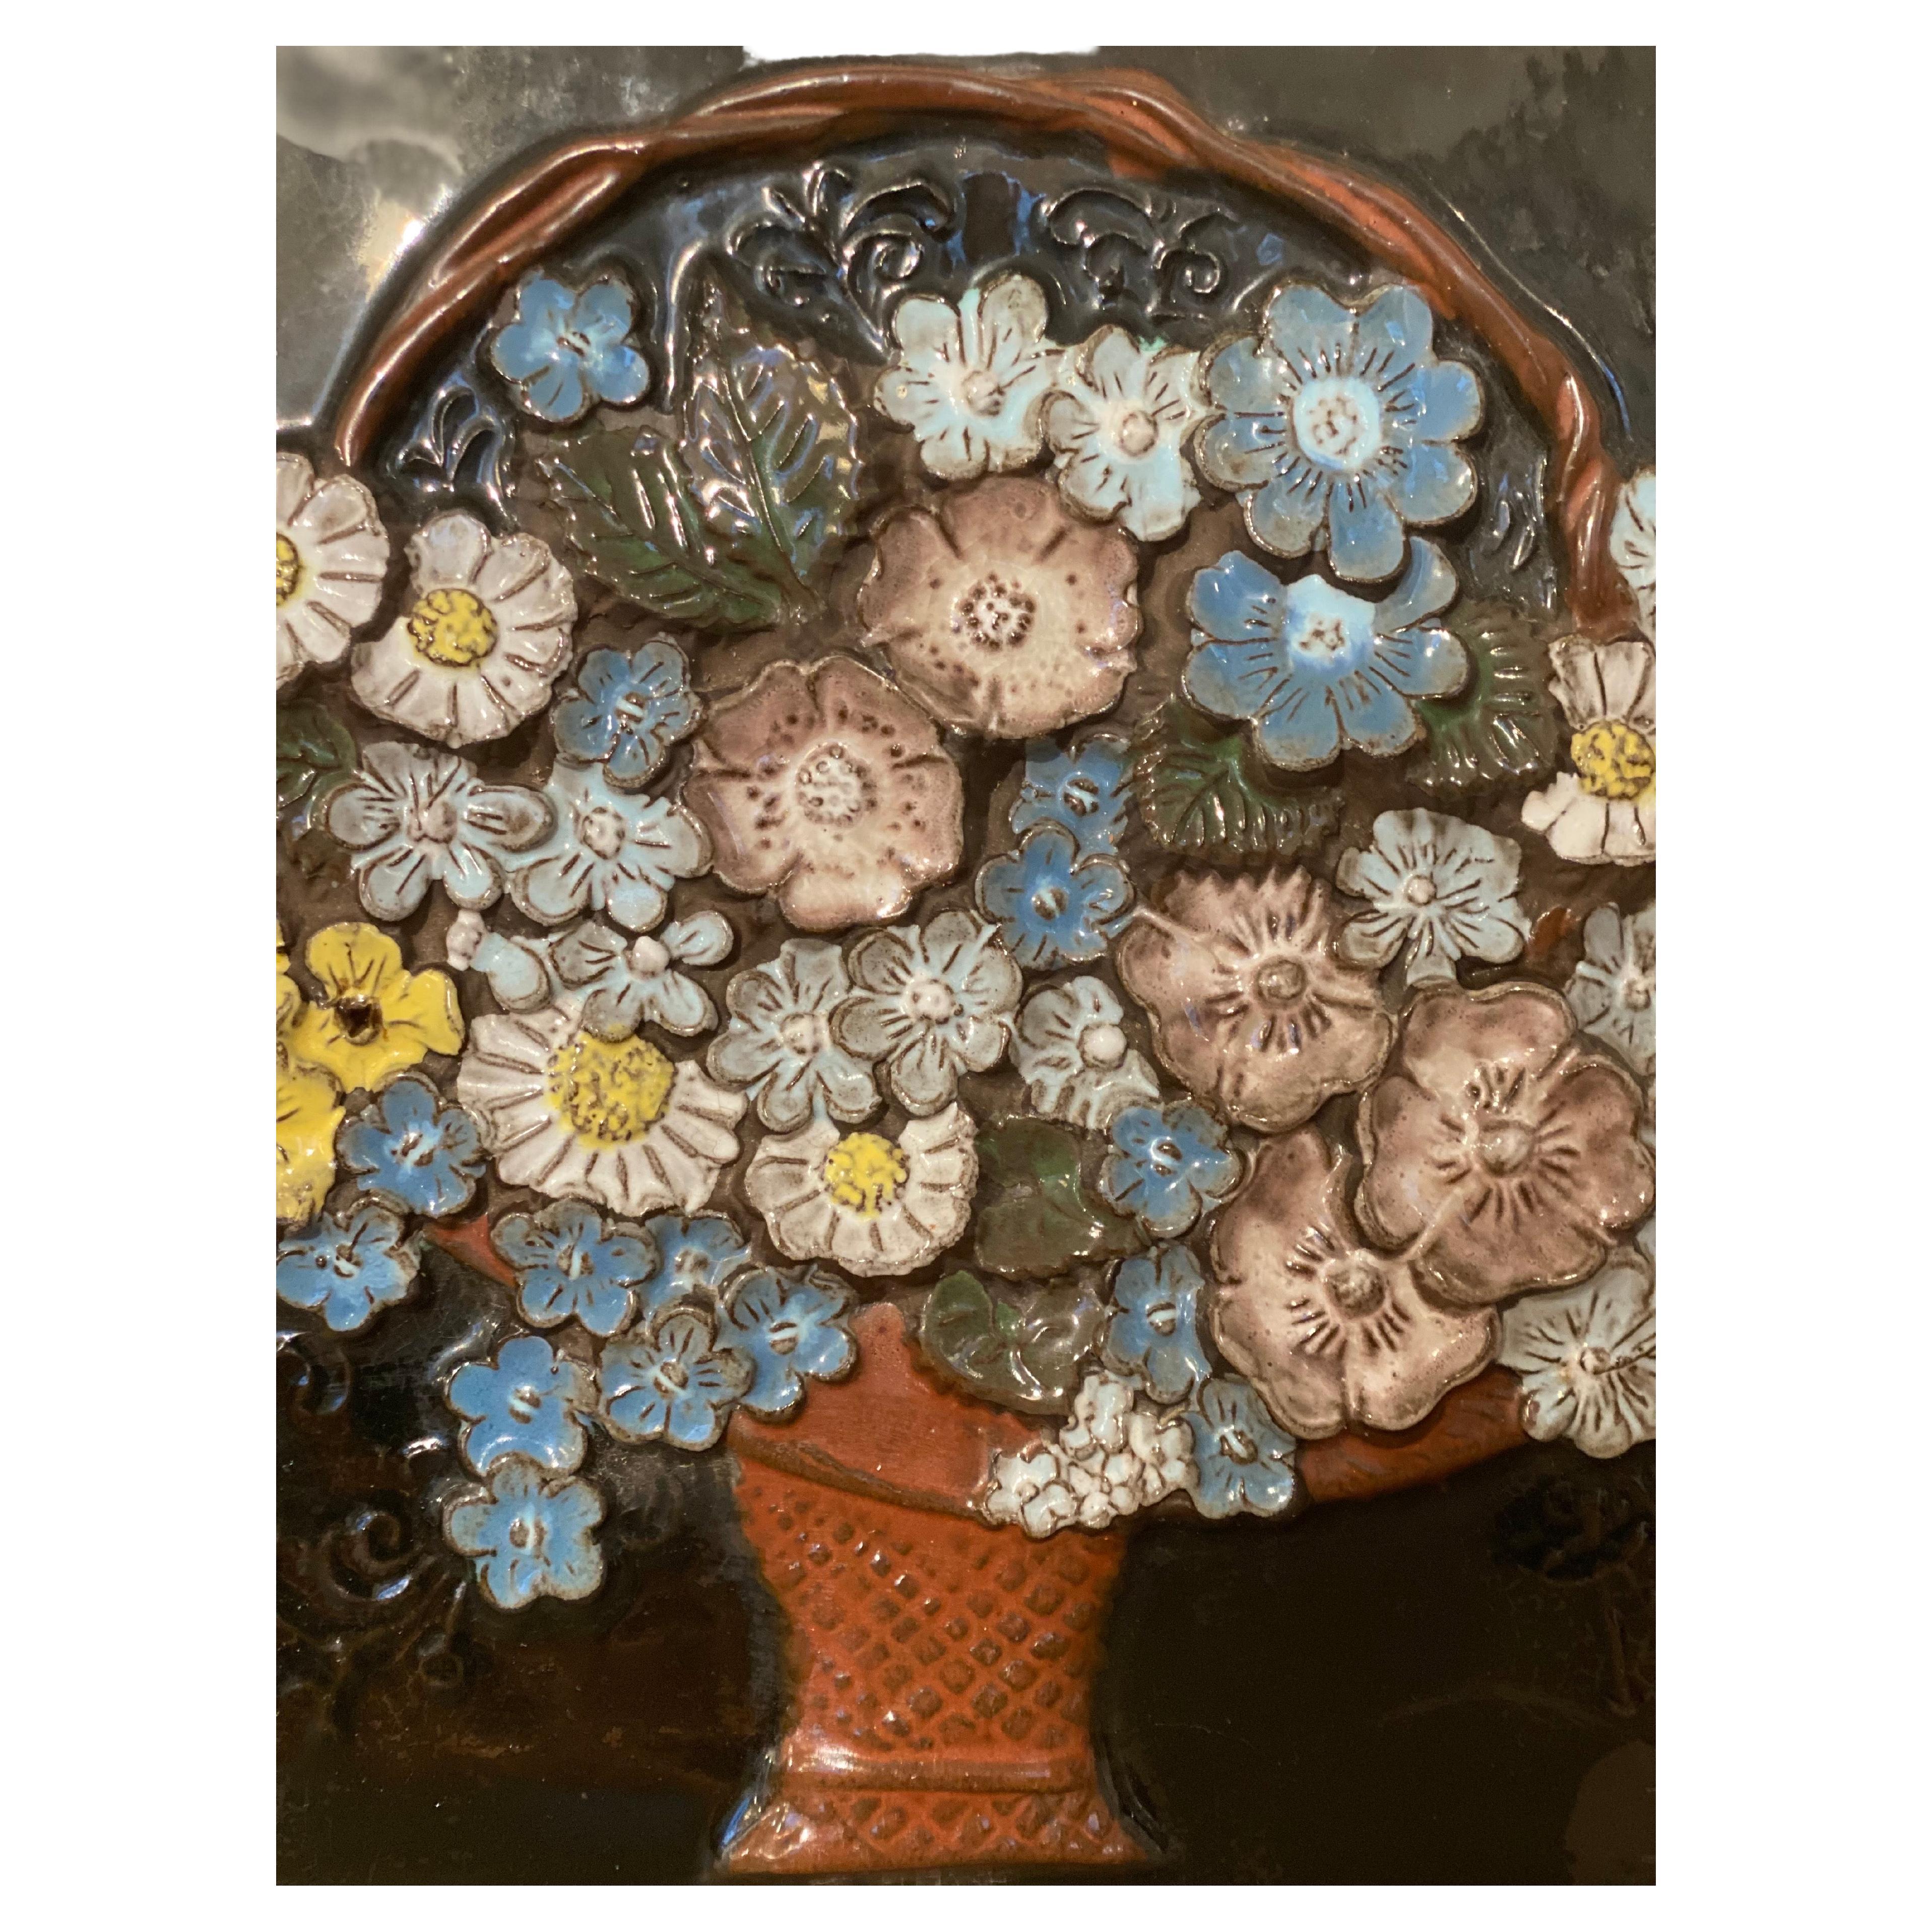 A vintage ceramic Jie Sweden wall plaque colorful flower tile to hang on the wall decorated with a flower basket designed by Aimo Nietosvuori for JIE Gantofta. In the beginning, he had his own factory, but from 1976, he worked as a designer of Jie